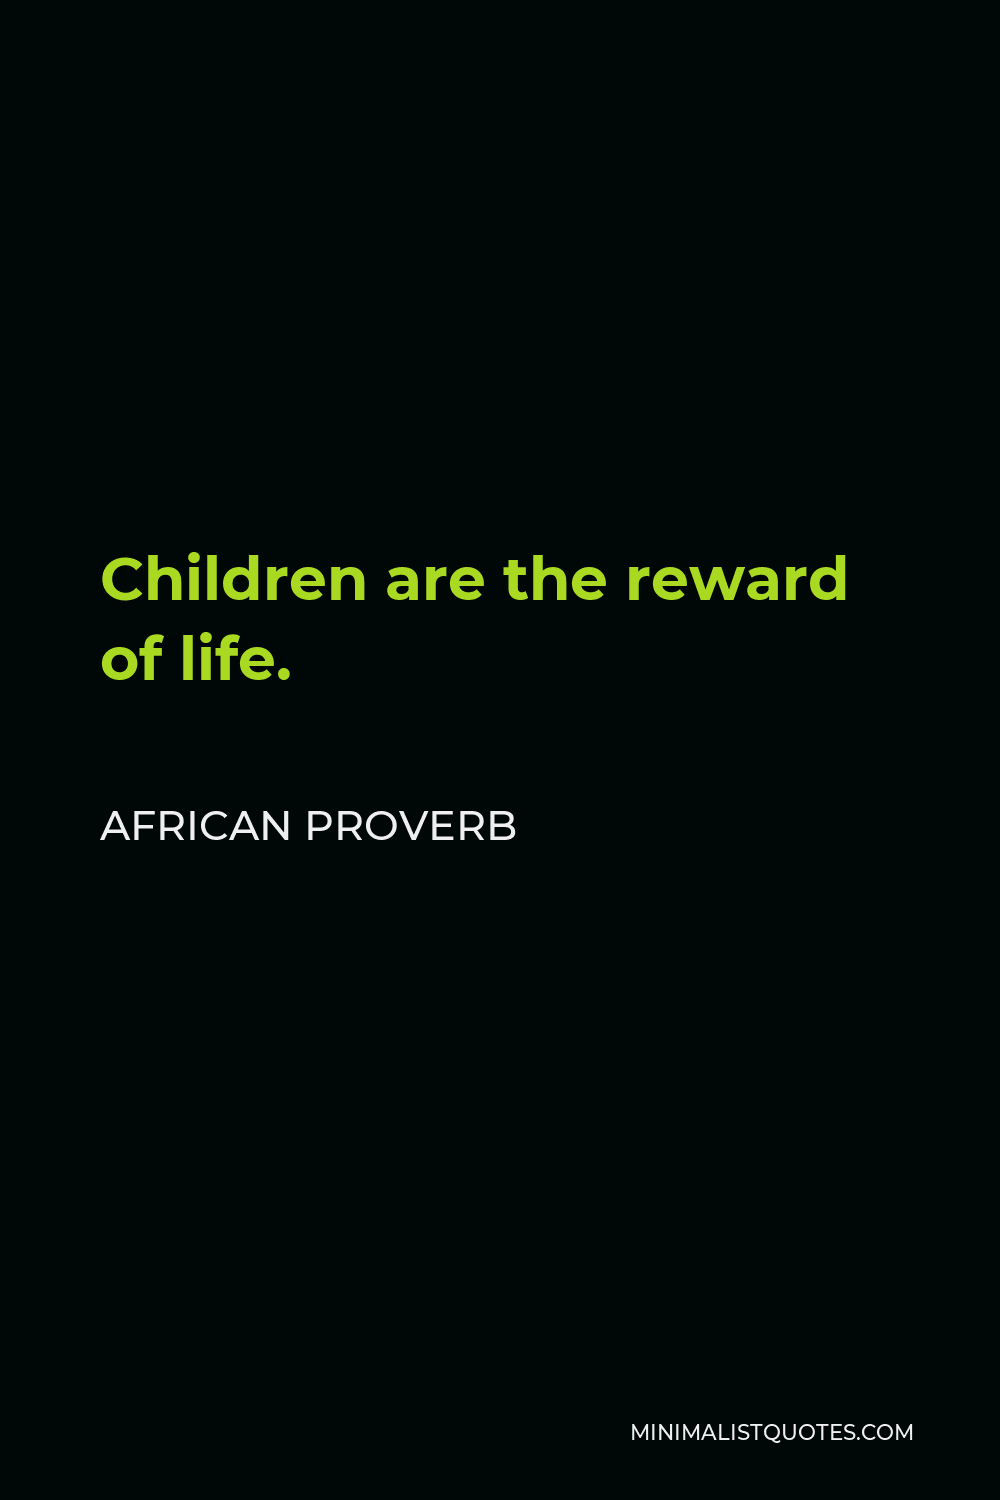 African Proverb Quote - Children are the reward of life.